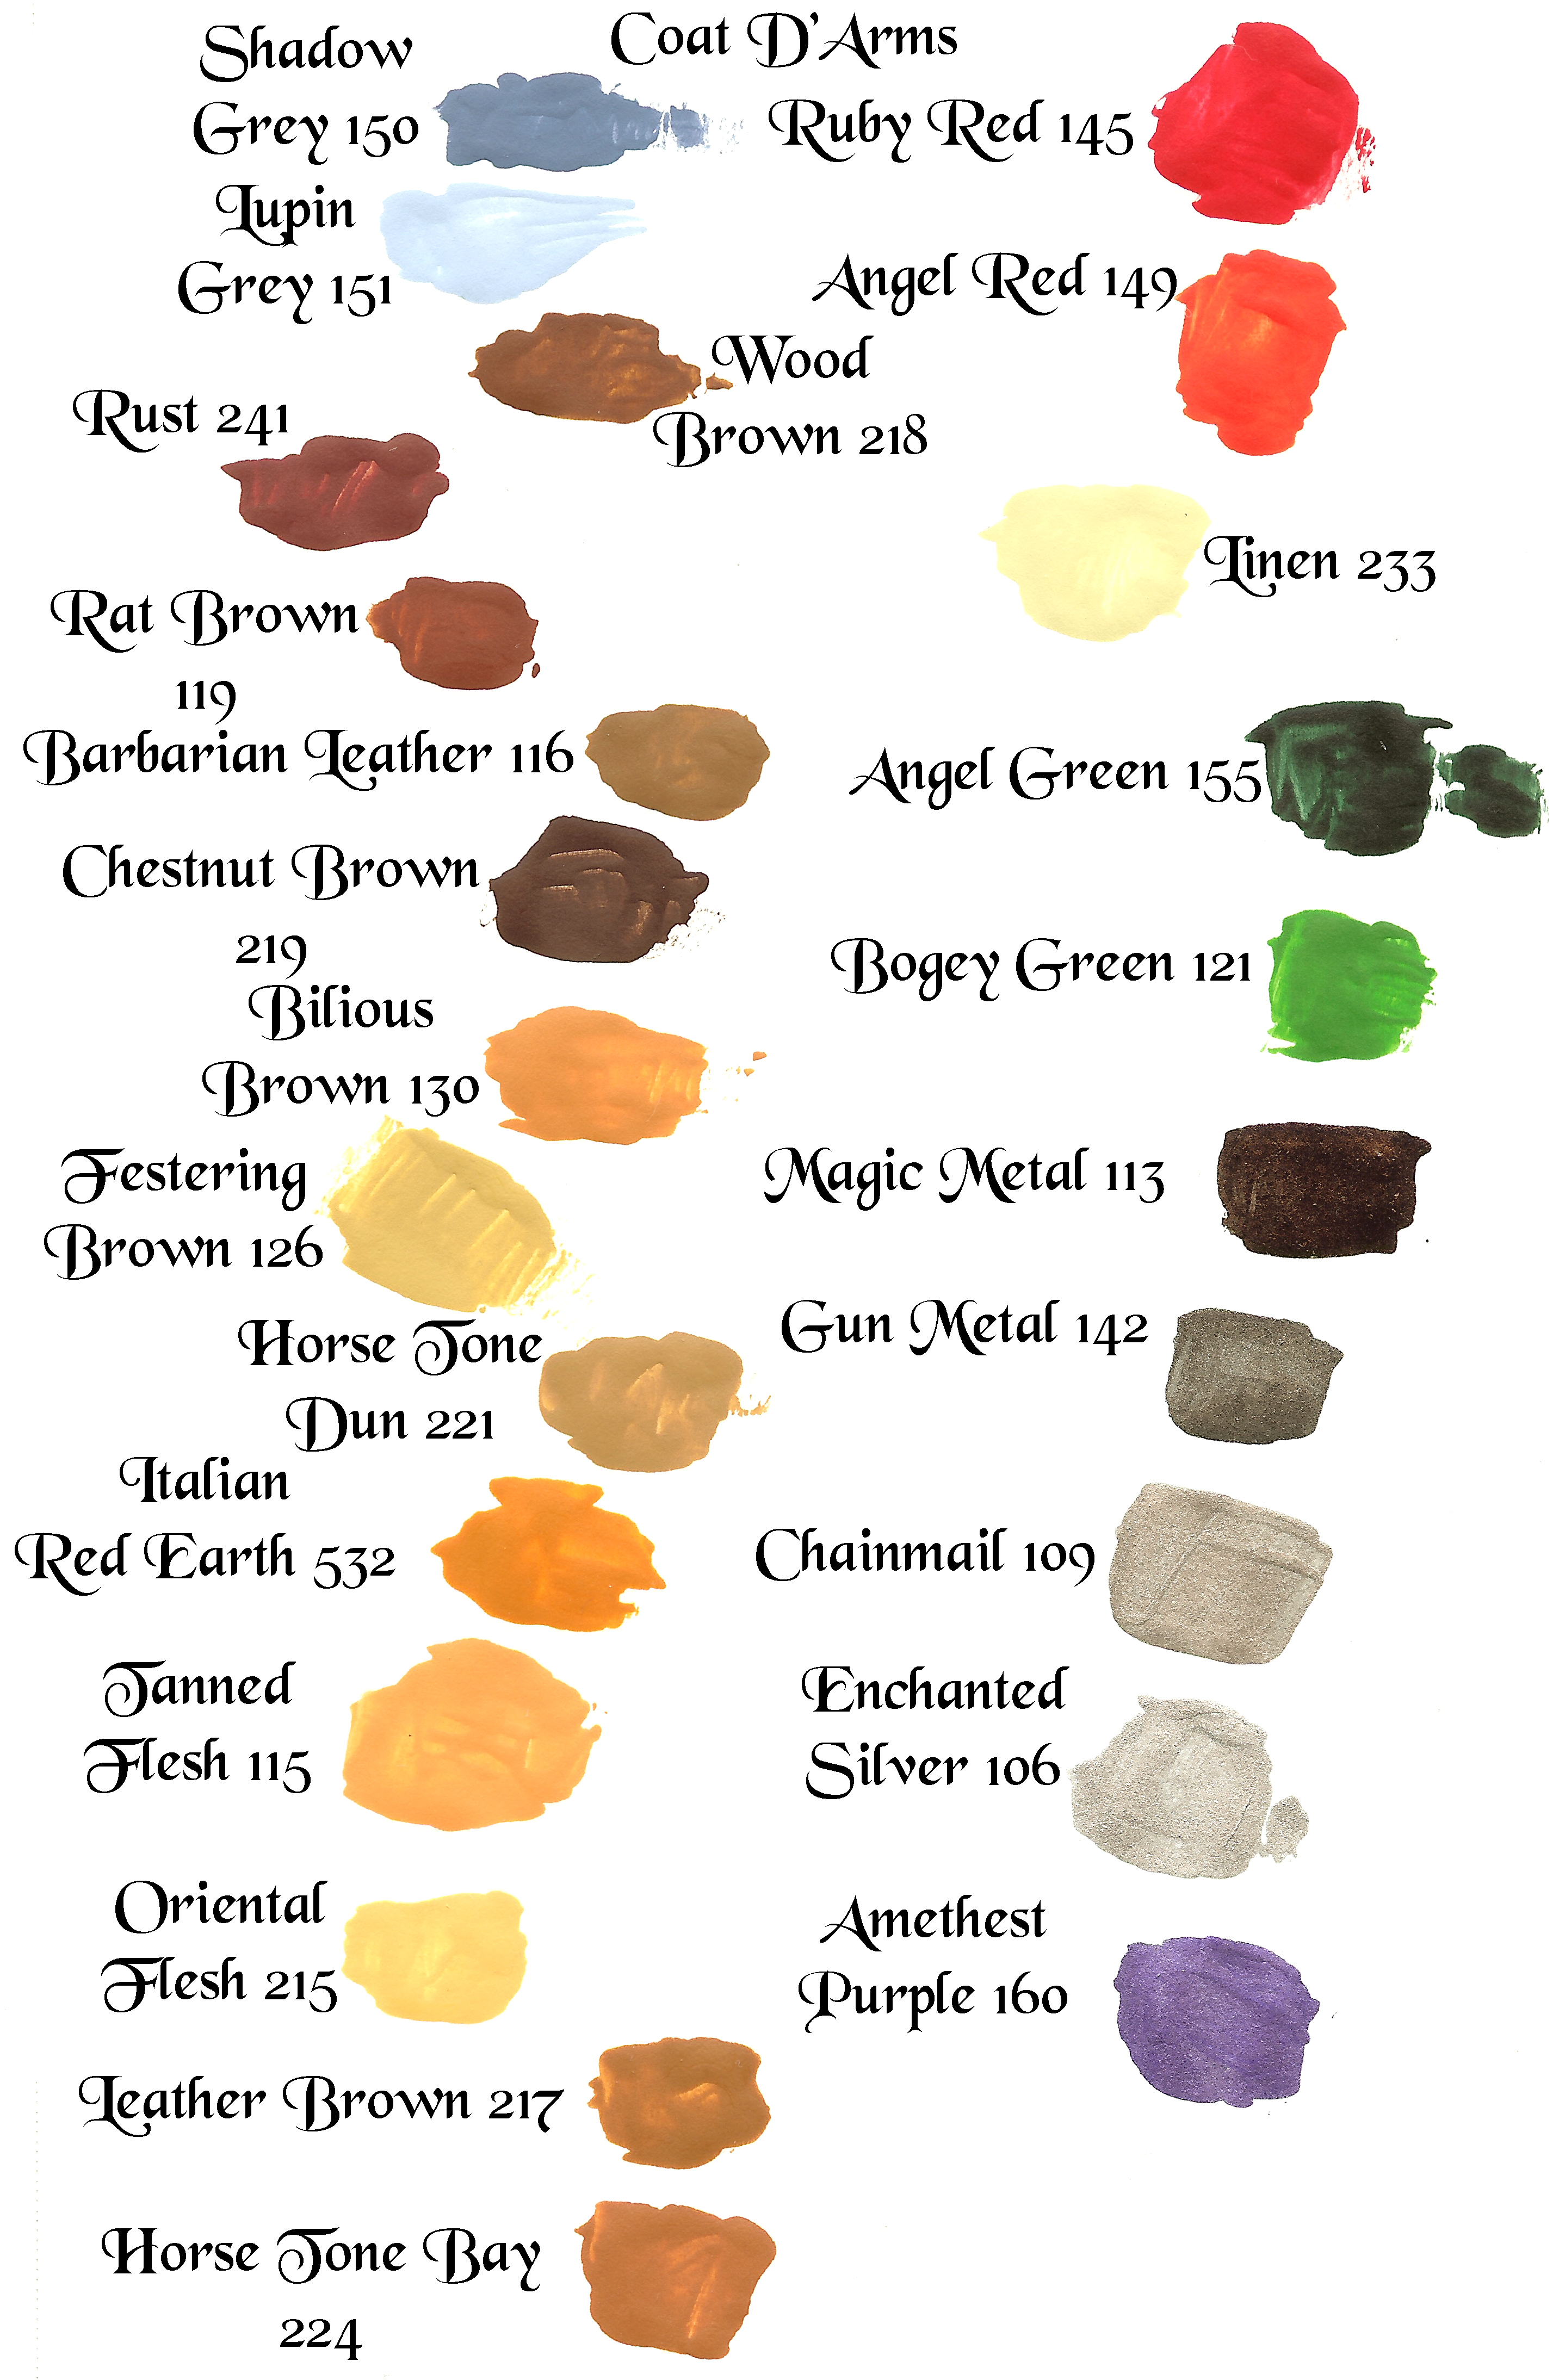 More Coat D'Arms Swatches